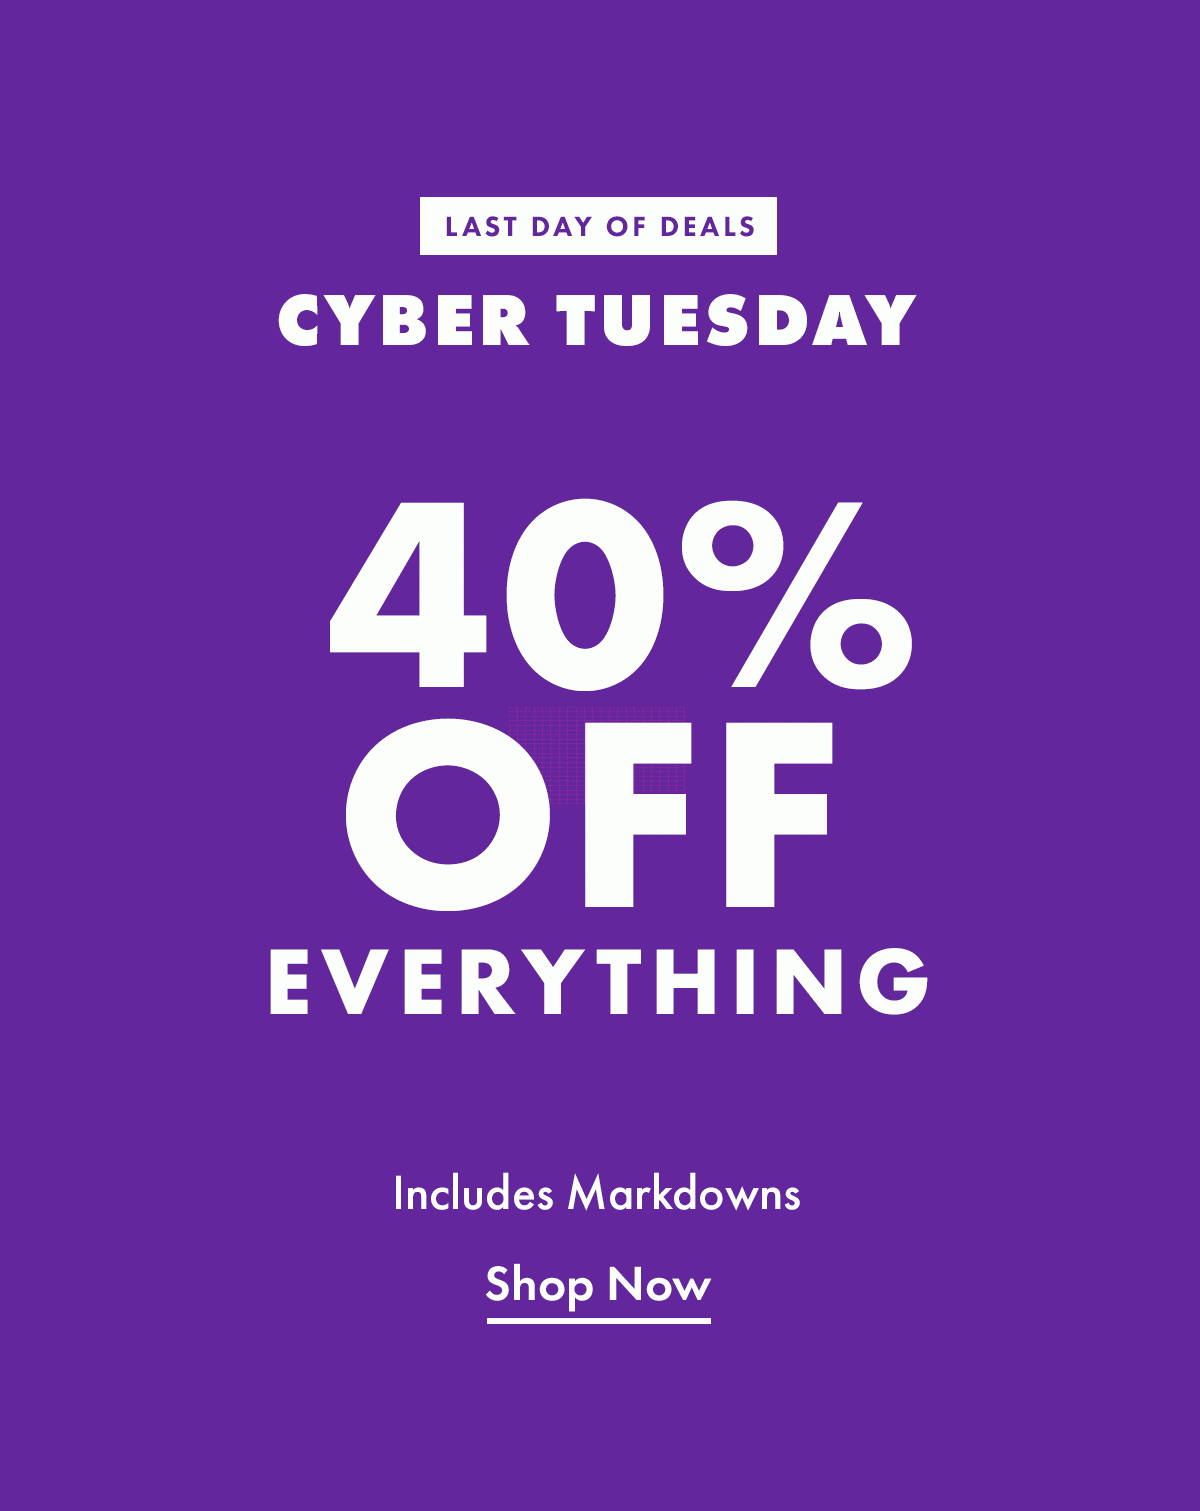 Cyber Monday 40% Off Last Day